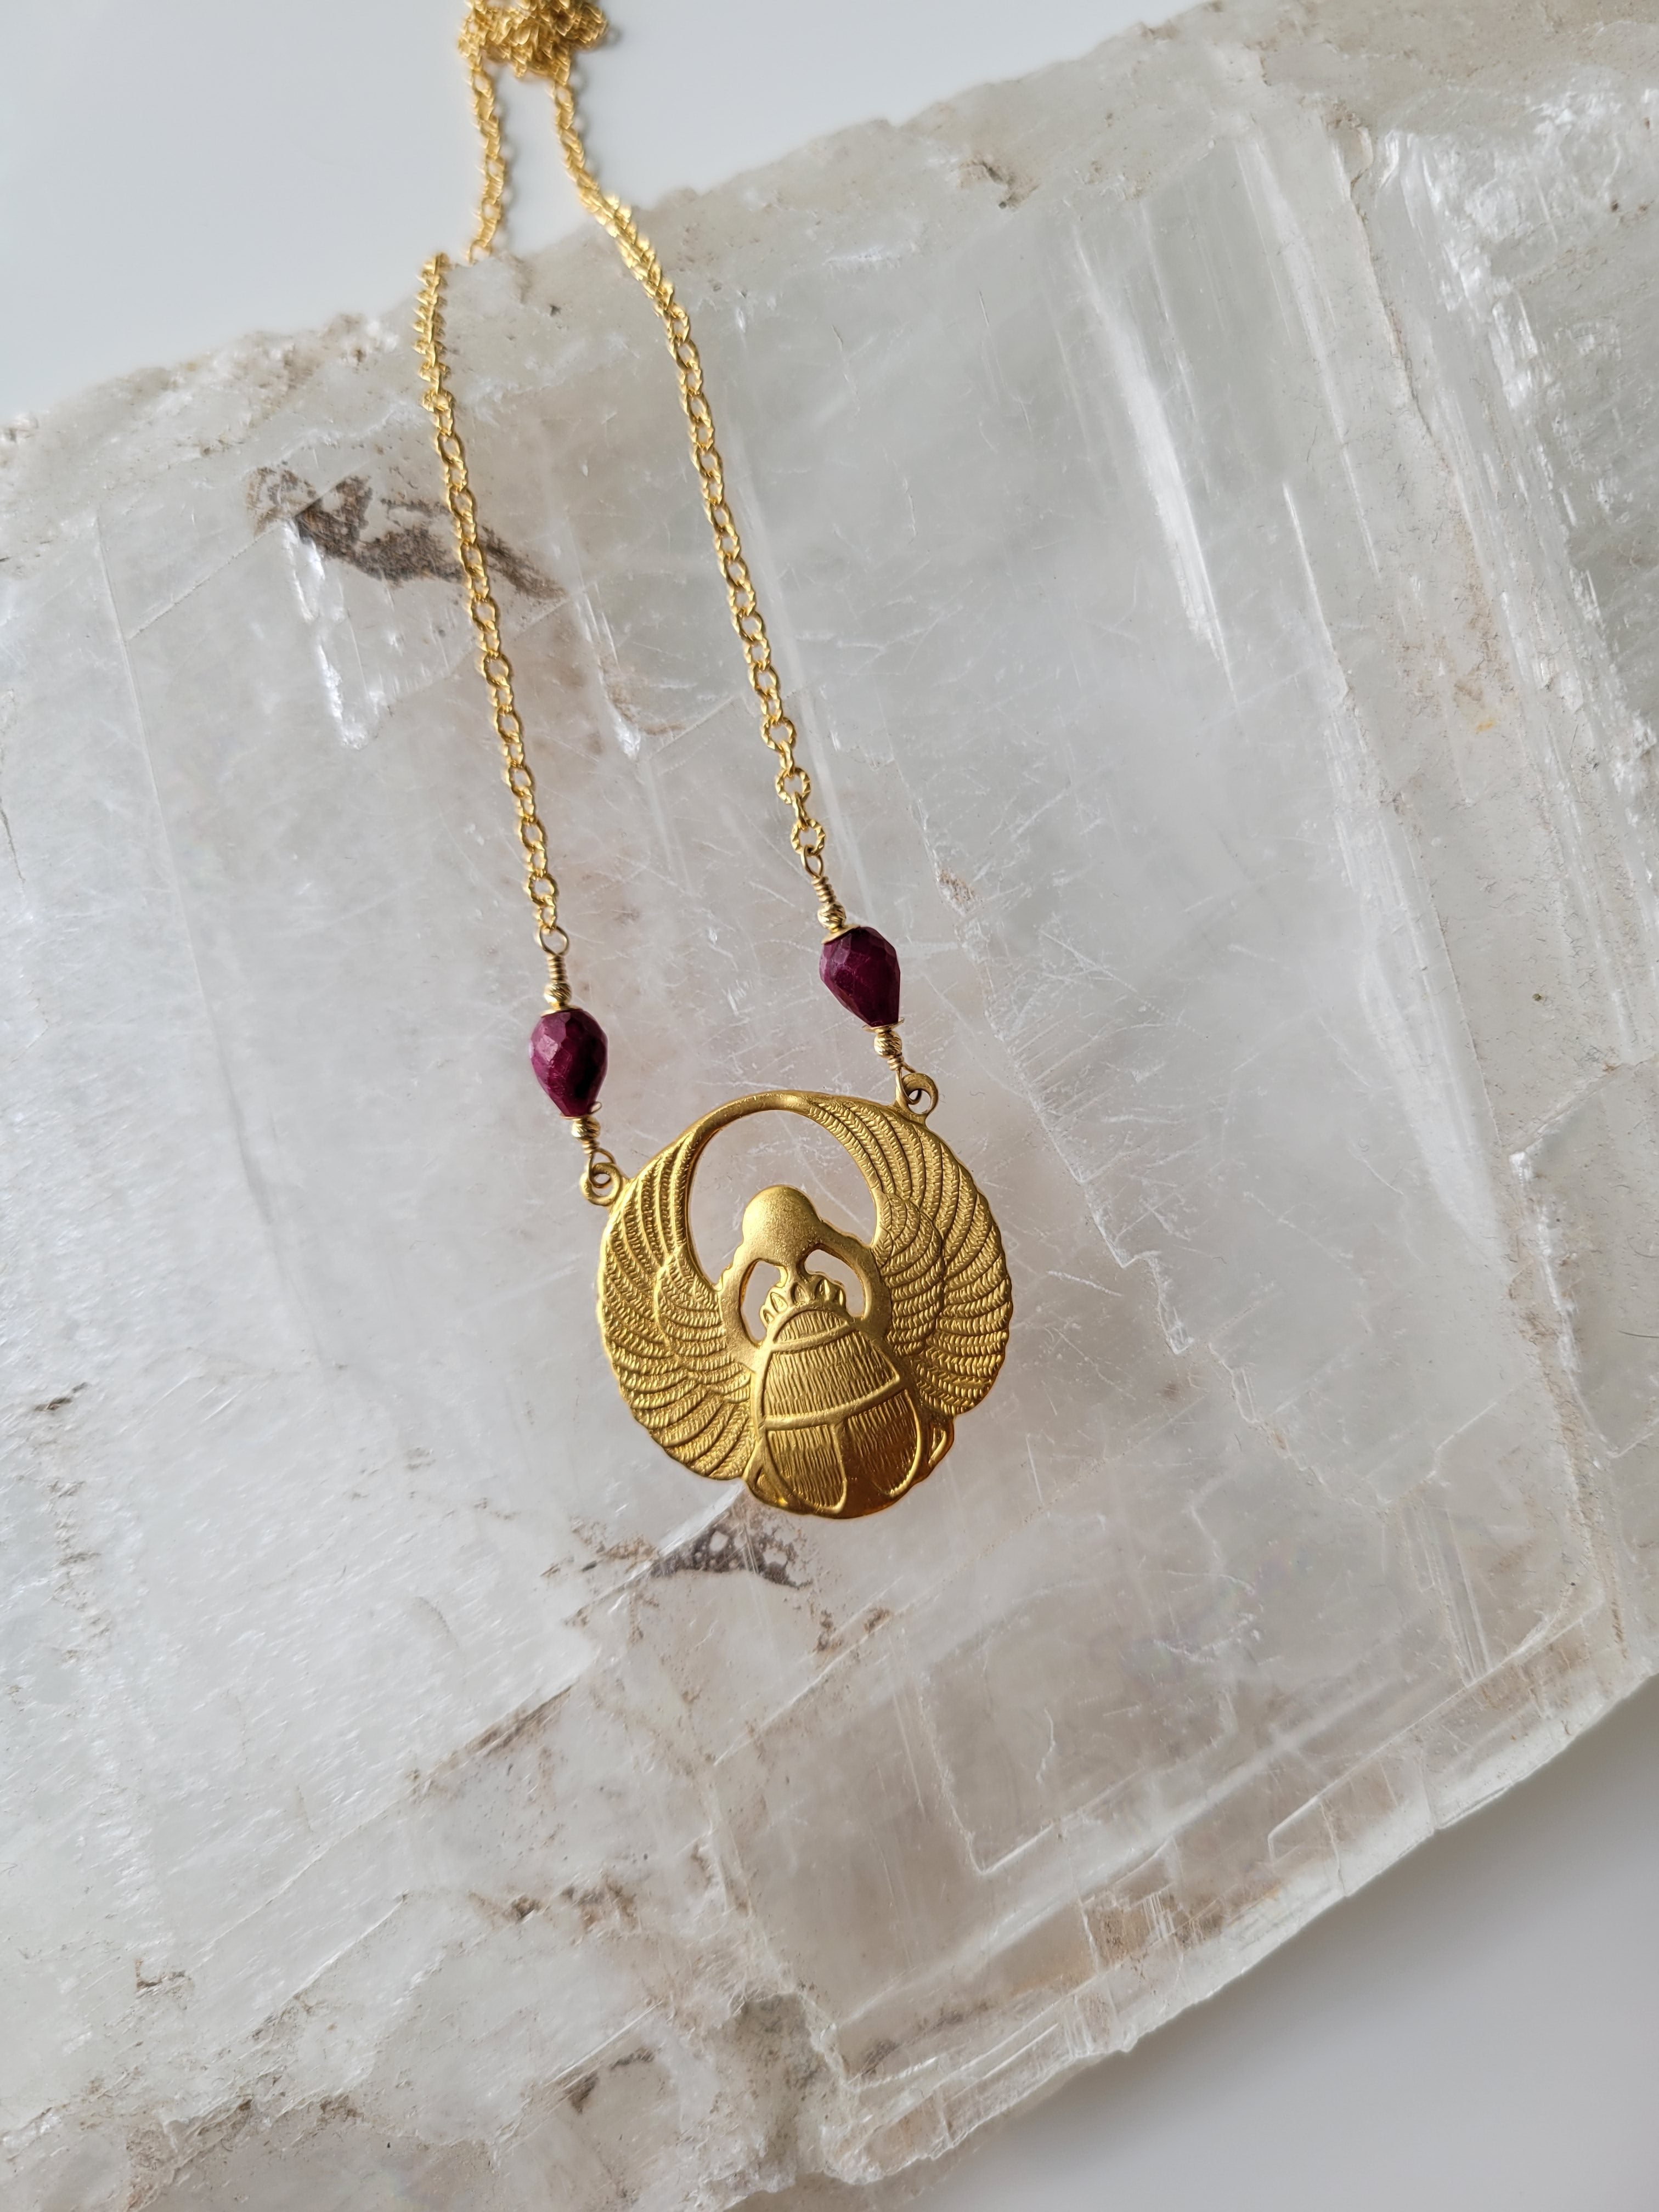 Golden Scarab with Rubies: A Re-Birth Necklace